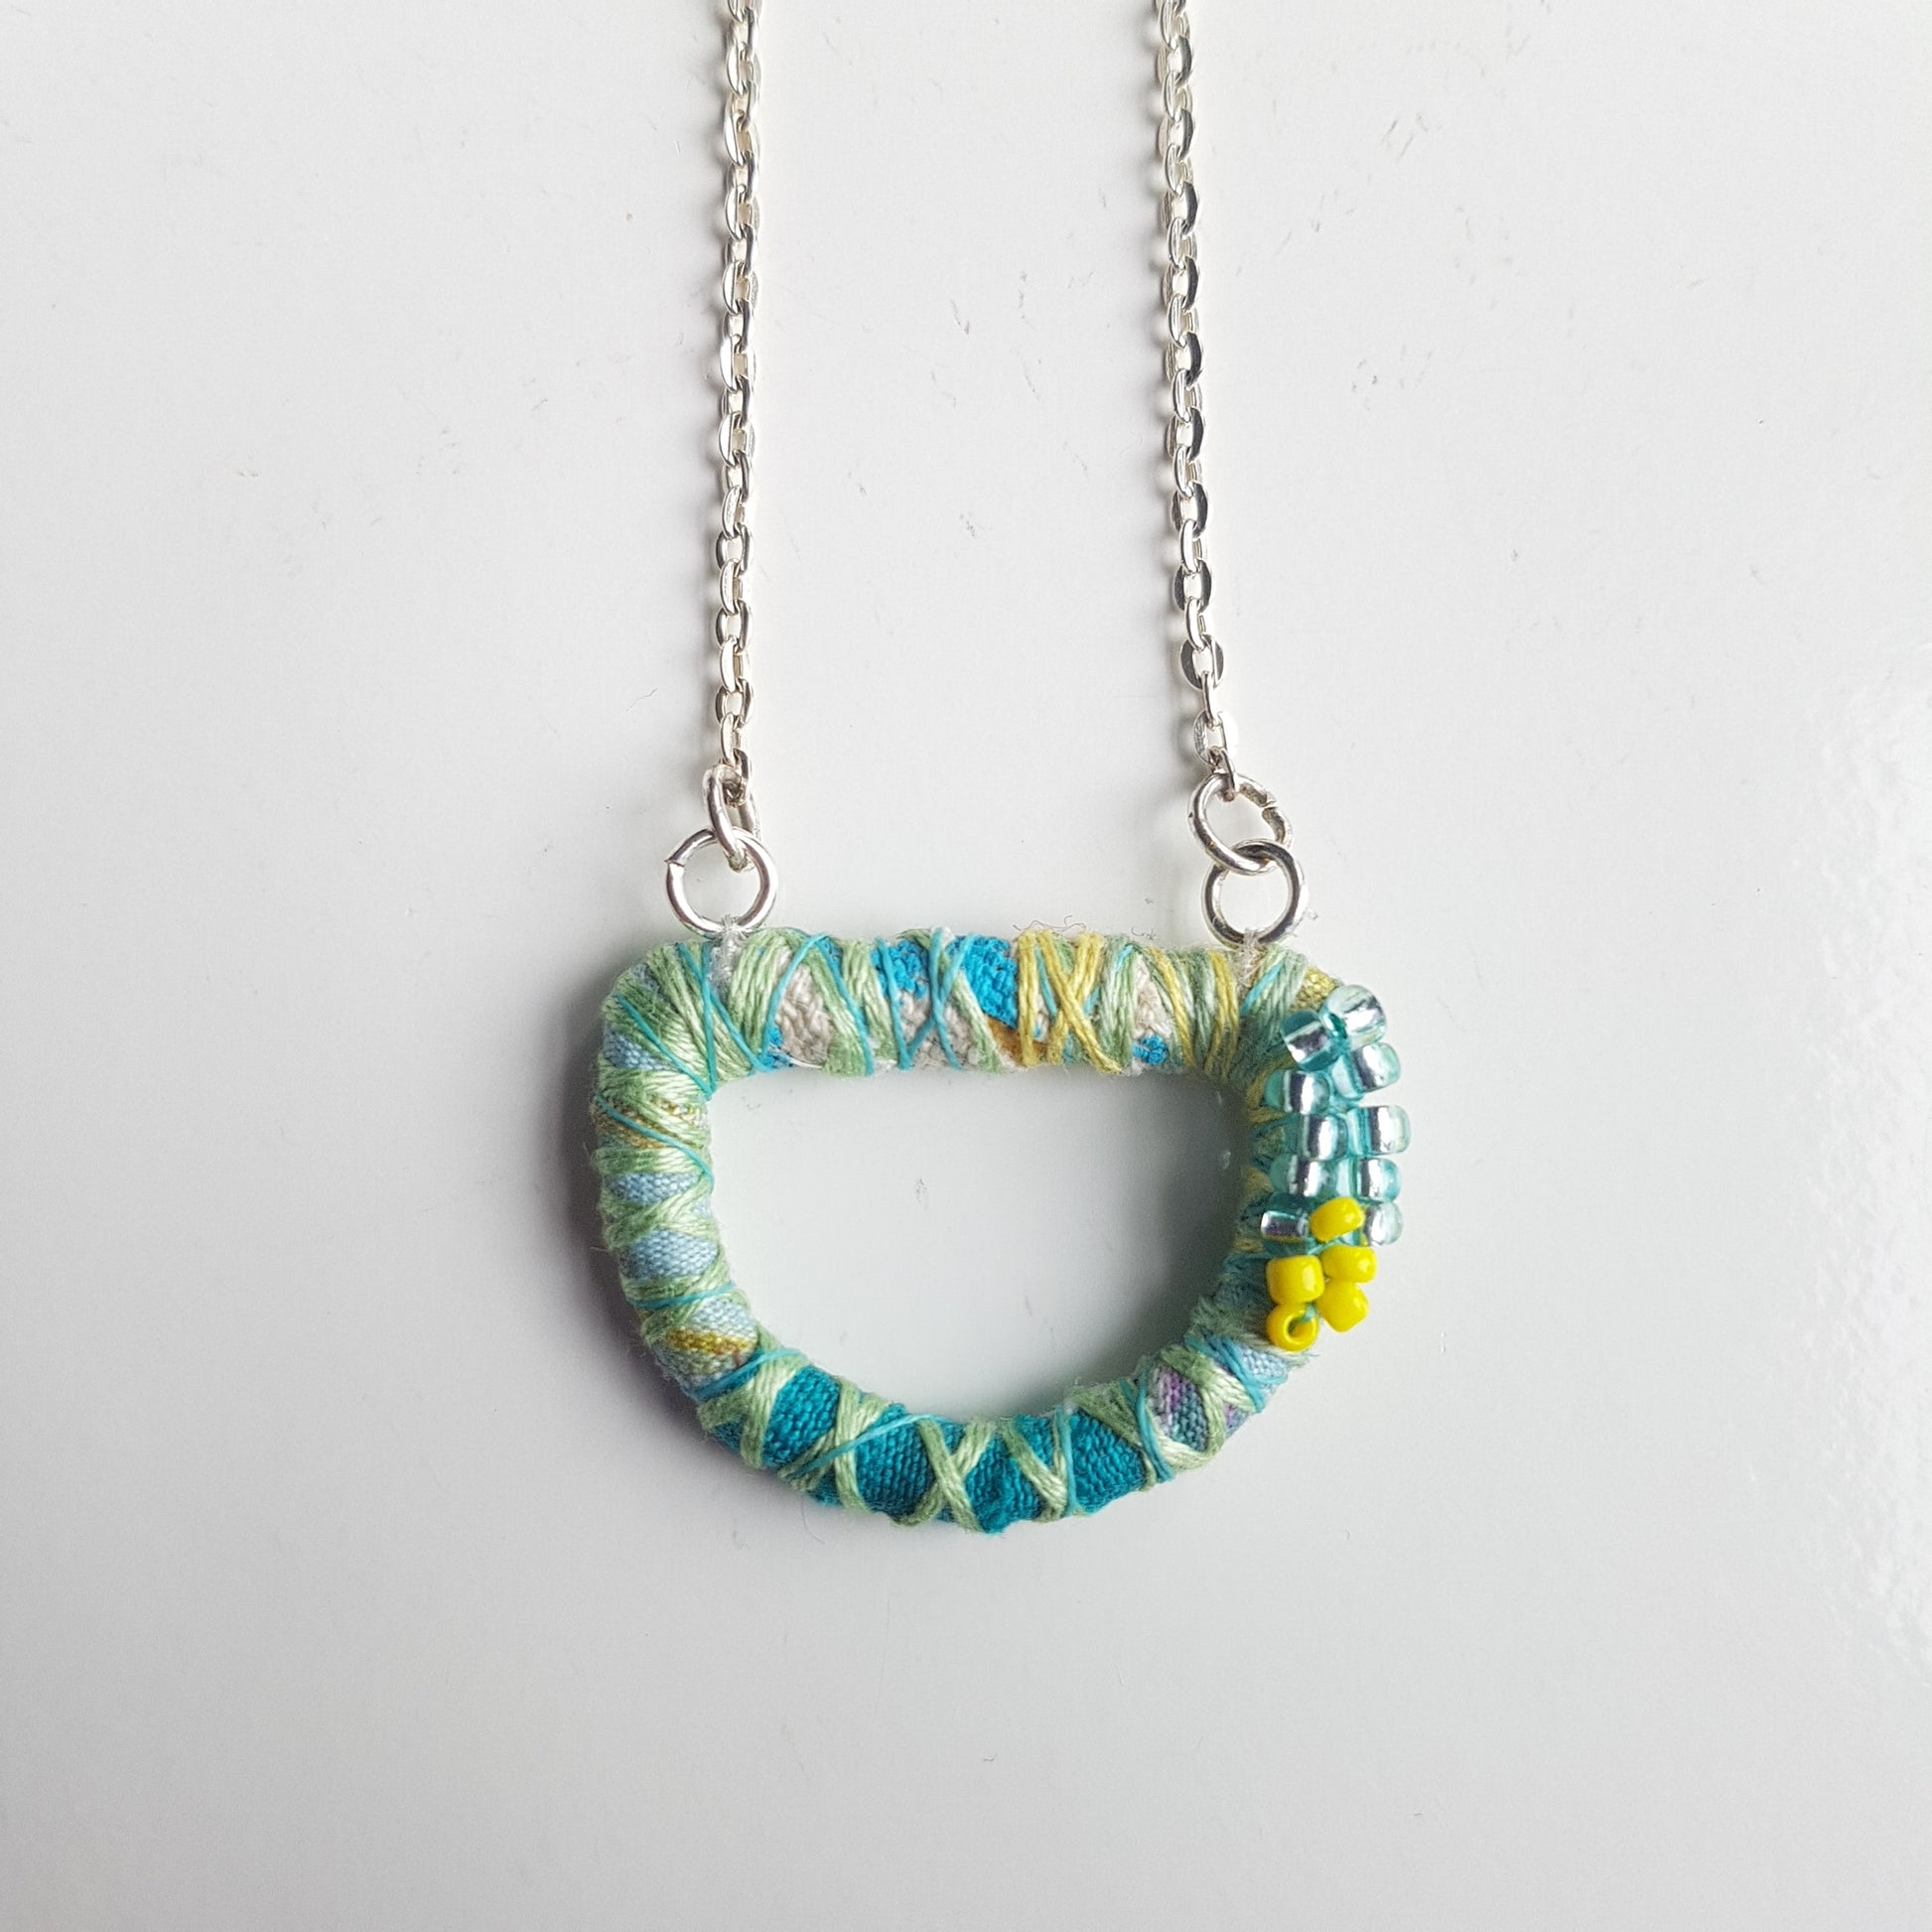 Pale green  blue and yellow textile art necklace with an 18" silver plated chain on a white table top.